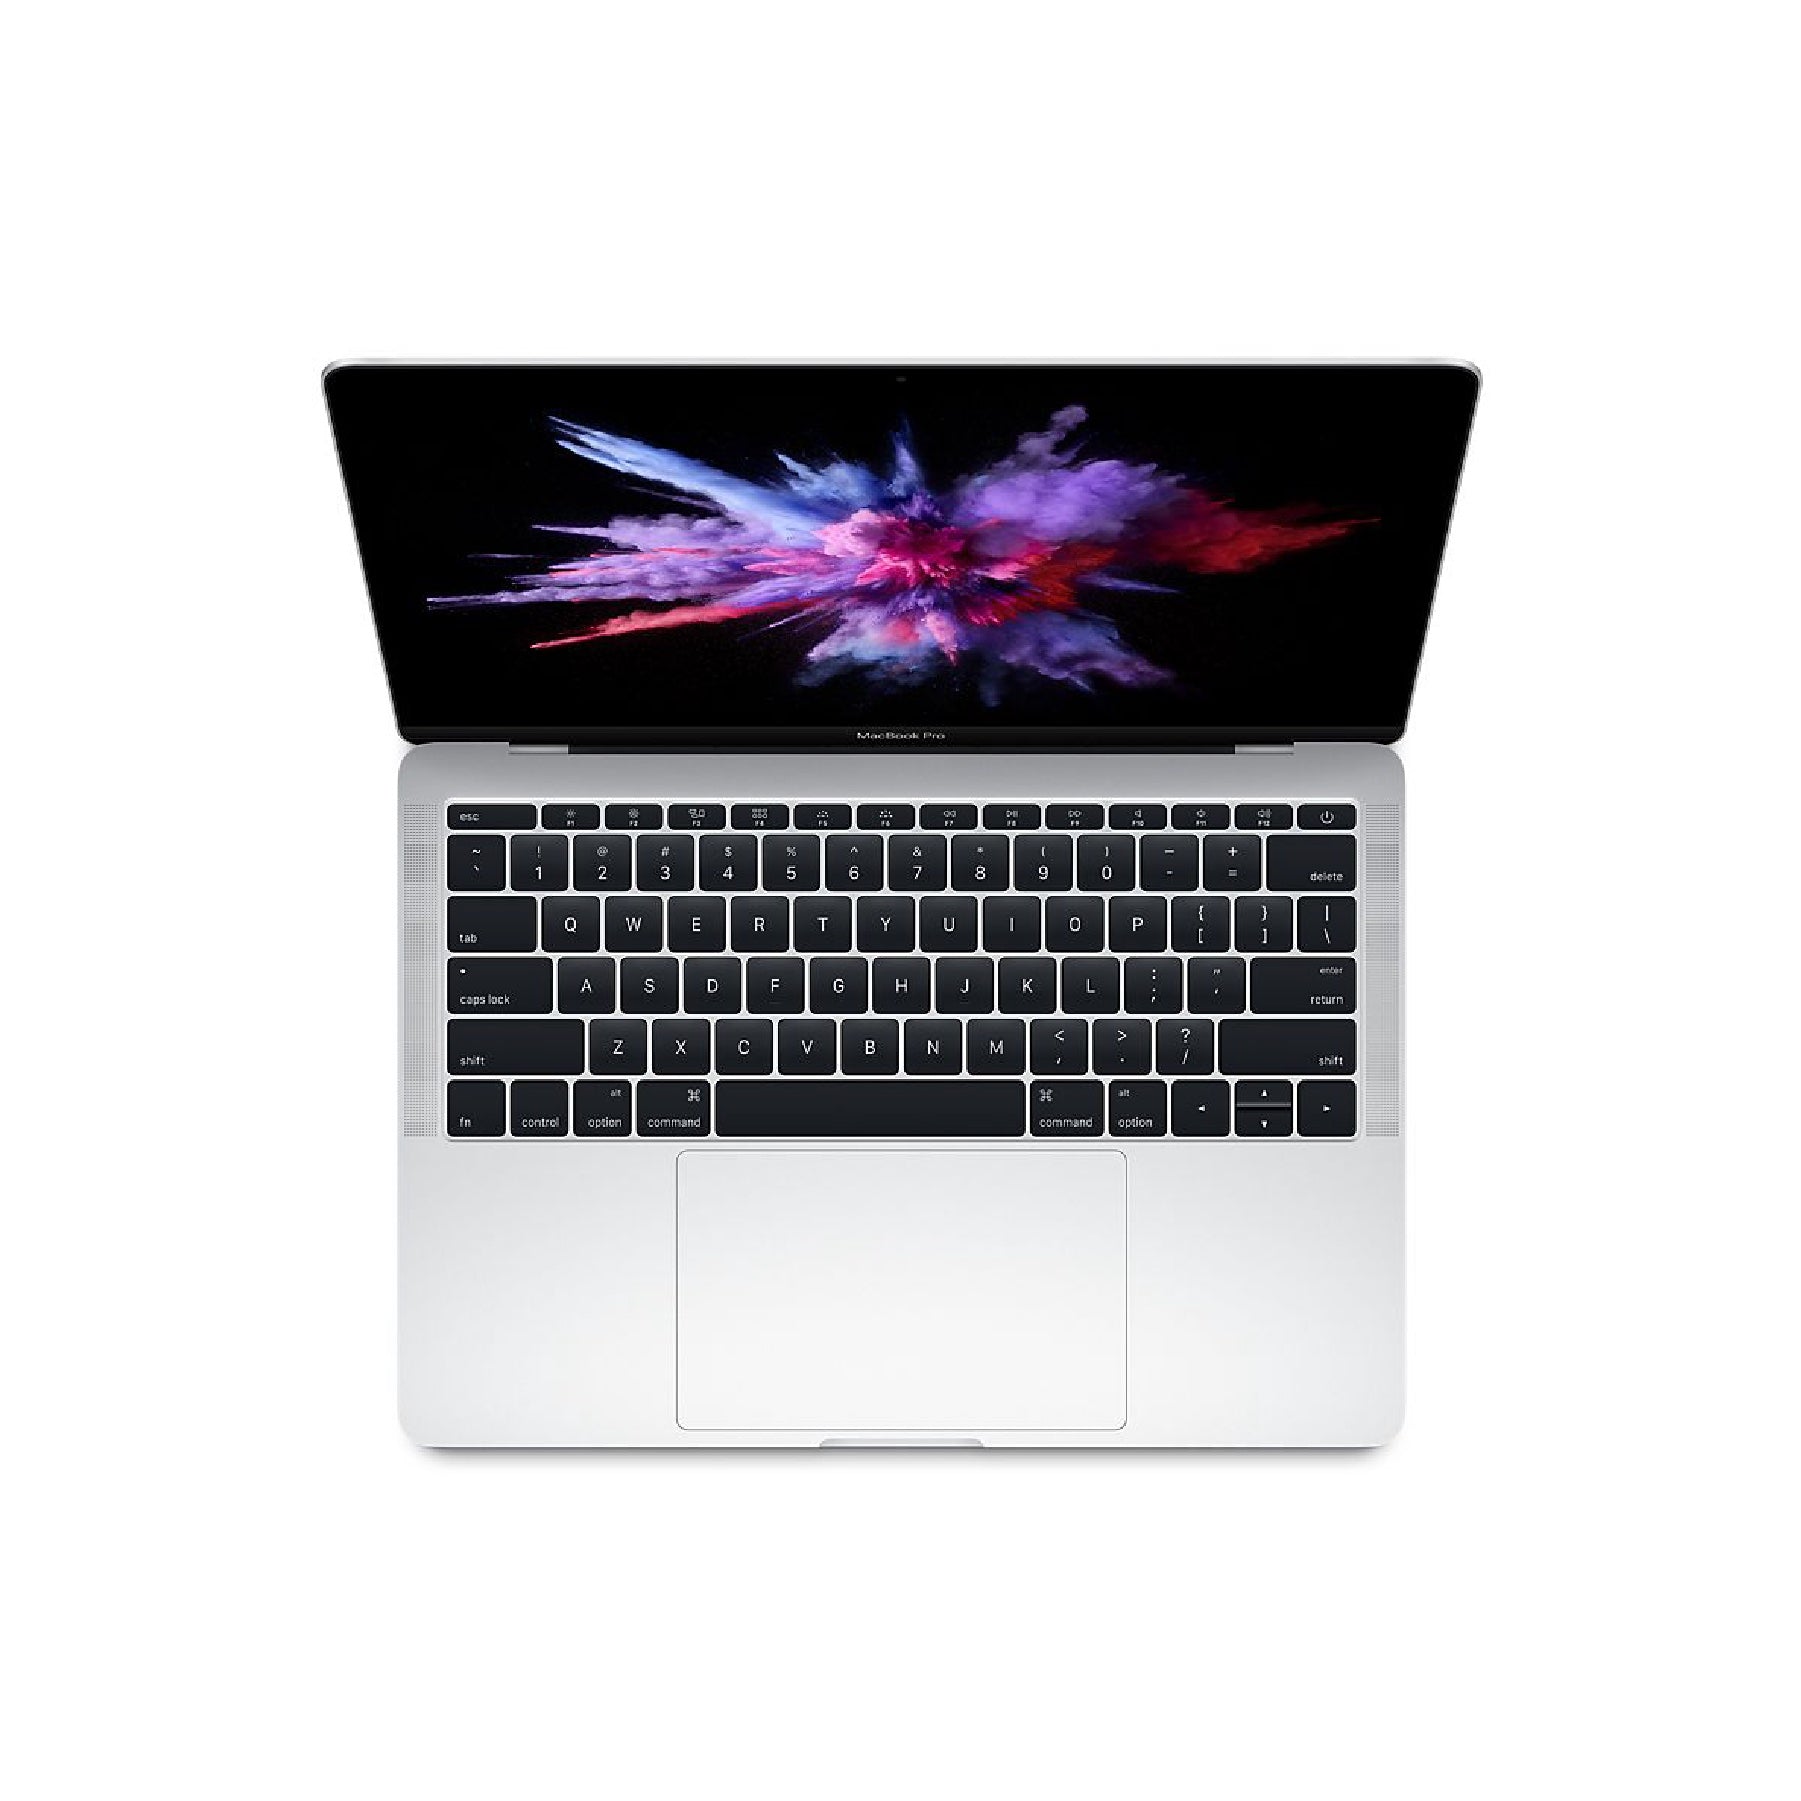 MacBook Pro (13-inch, 2016, Two Thunderbolt 3 ports) - Technical